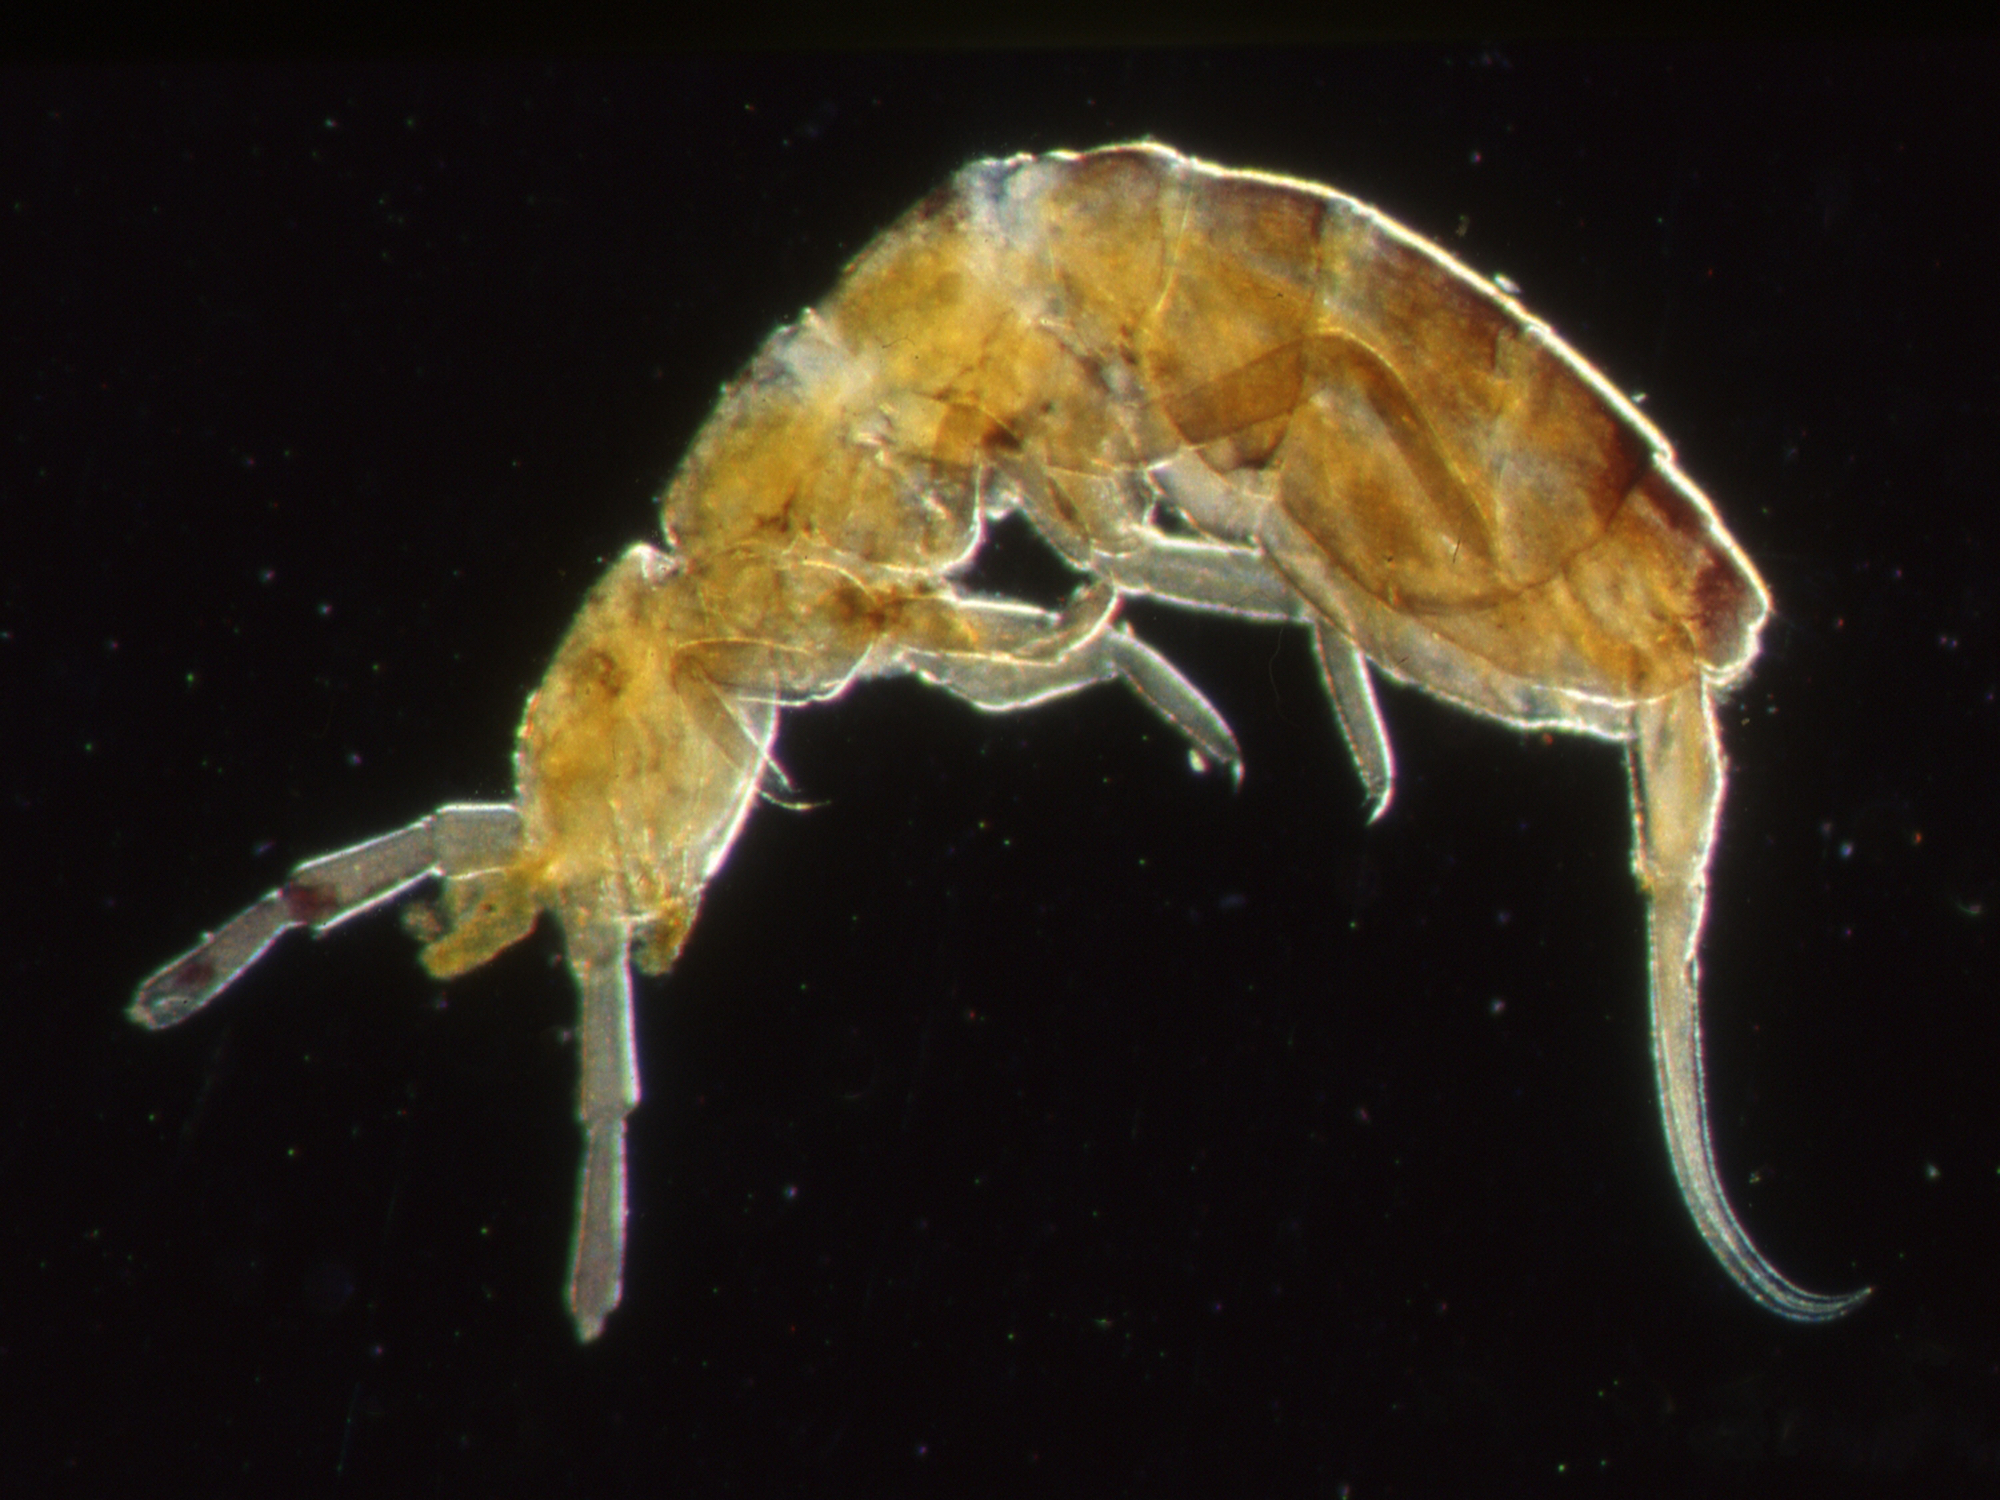 Springtail insect under the microscope